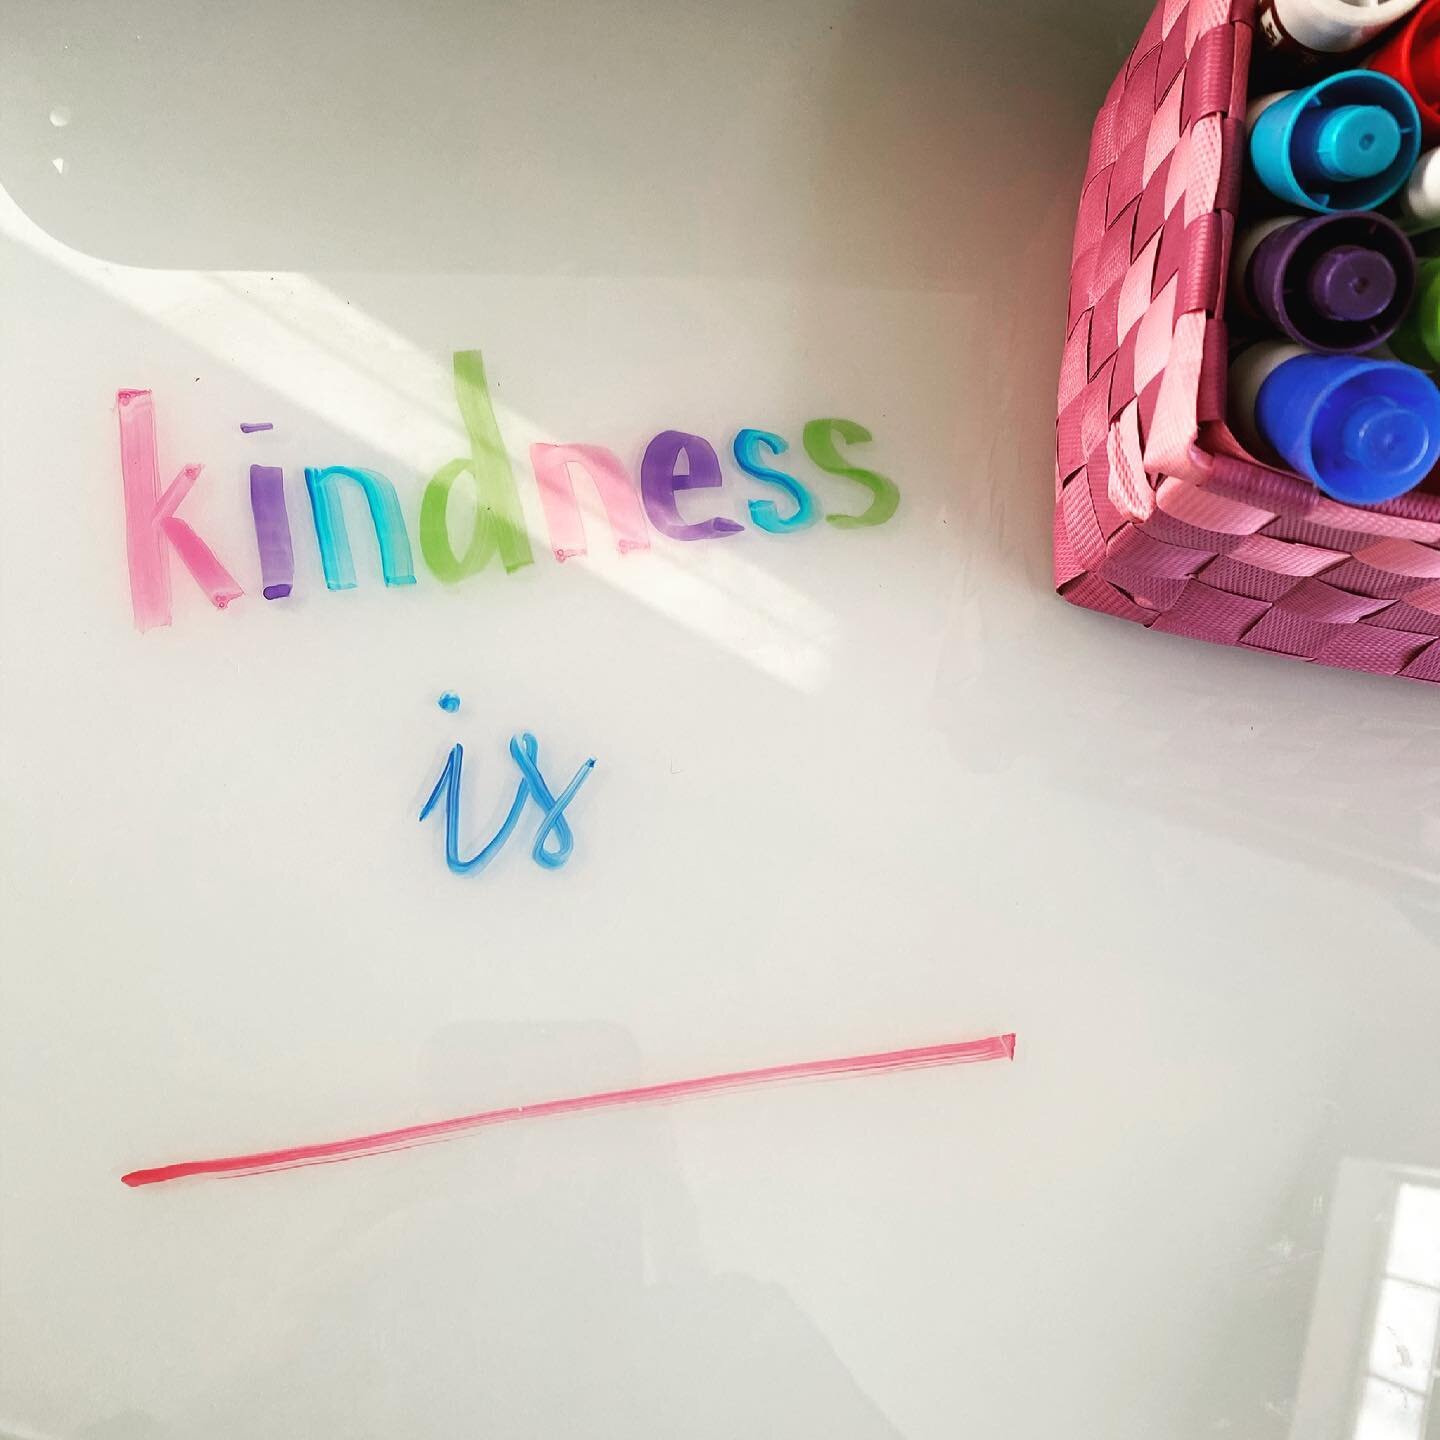 Fill in the blank... Kindness is ______. 

Would love to hear your thoughts.  Comment below. 

Fun side story - I LOVE dry erase boards and colored markers.  So yes, I did just create this post by writing in my new desk with a dry erase top.  It&rsqu